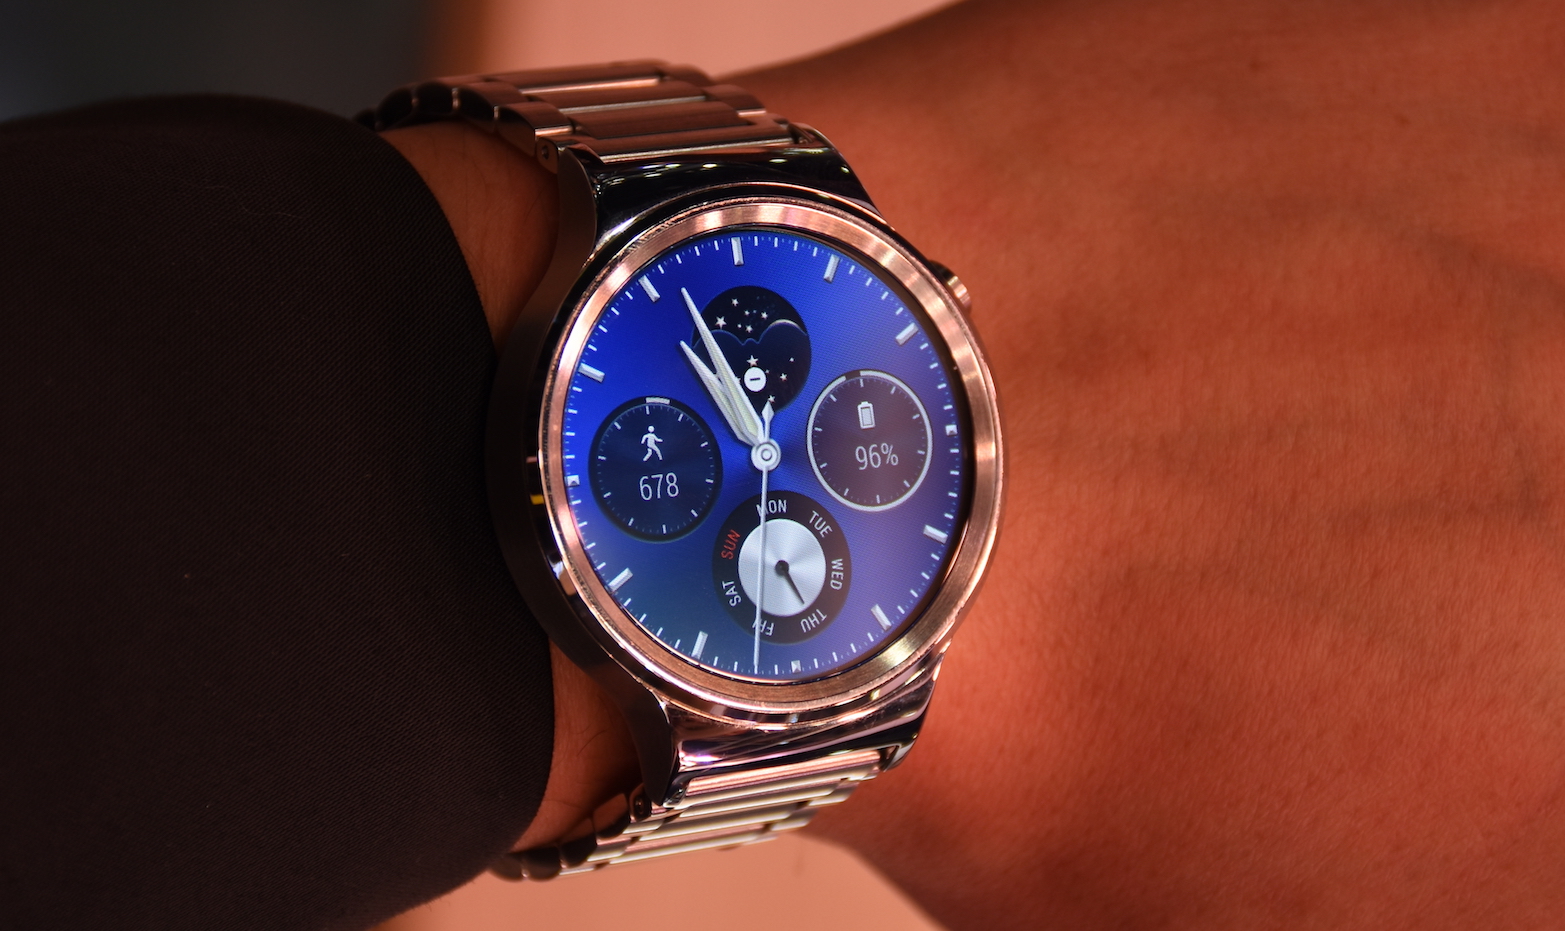 Android Wear 2.0 is now rolling out to the Huawei watch beta users 4